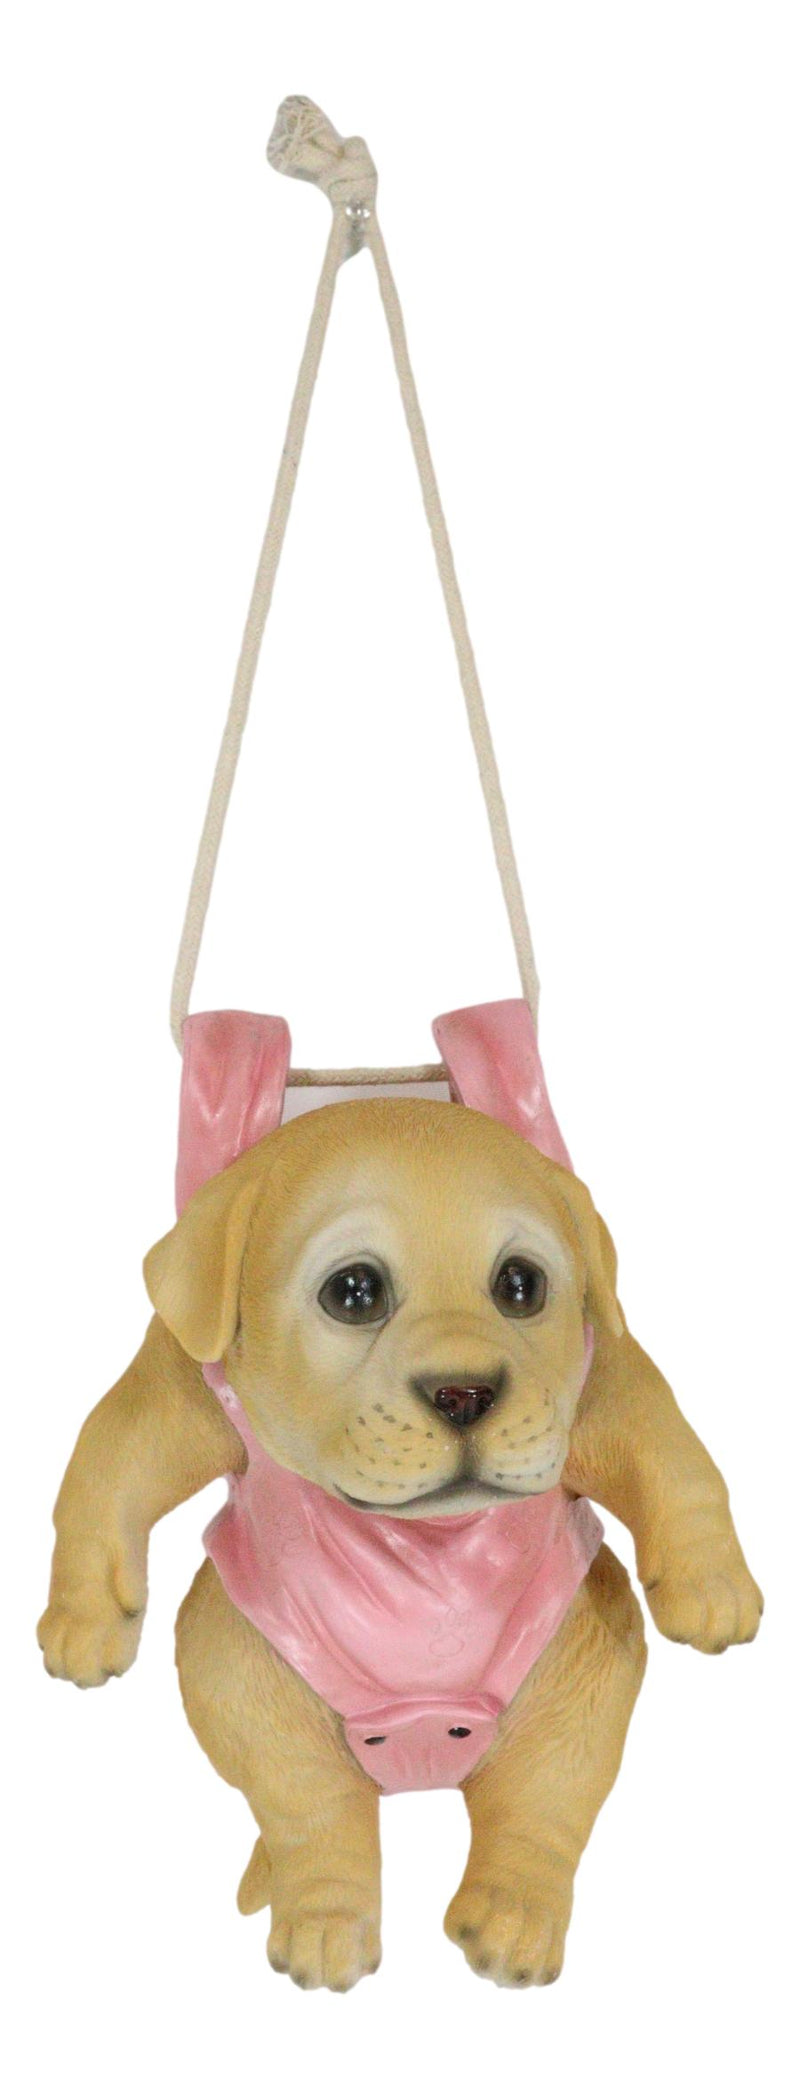 Set Of 2 Teacup Puppy Dogs On Blue And Pink Baby Onesie Swing Branch Hangers